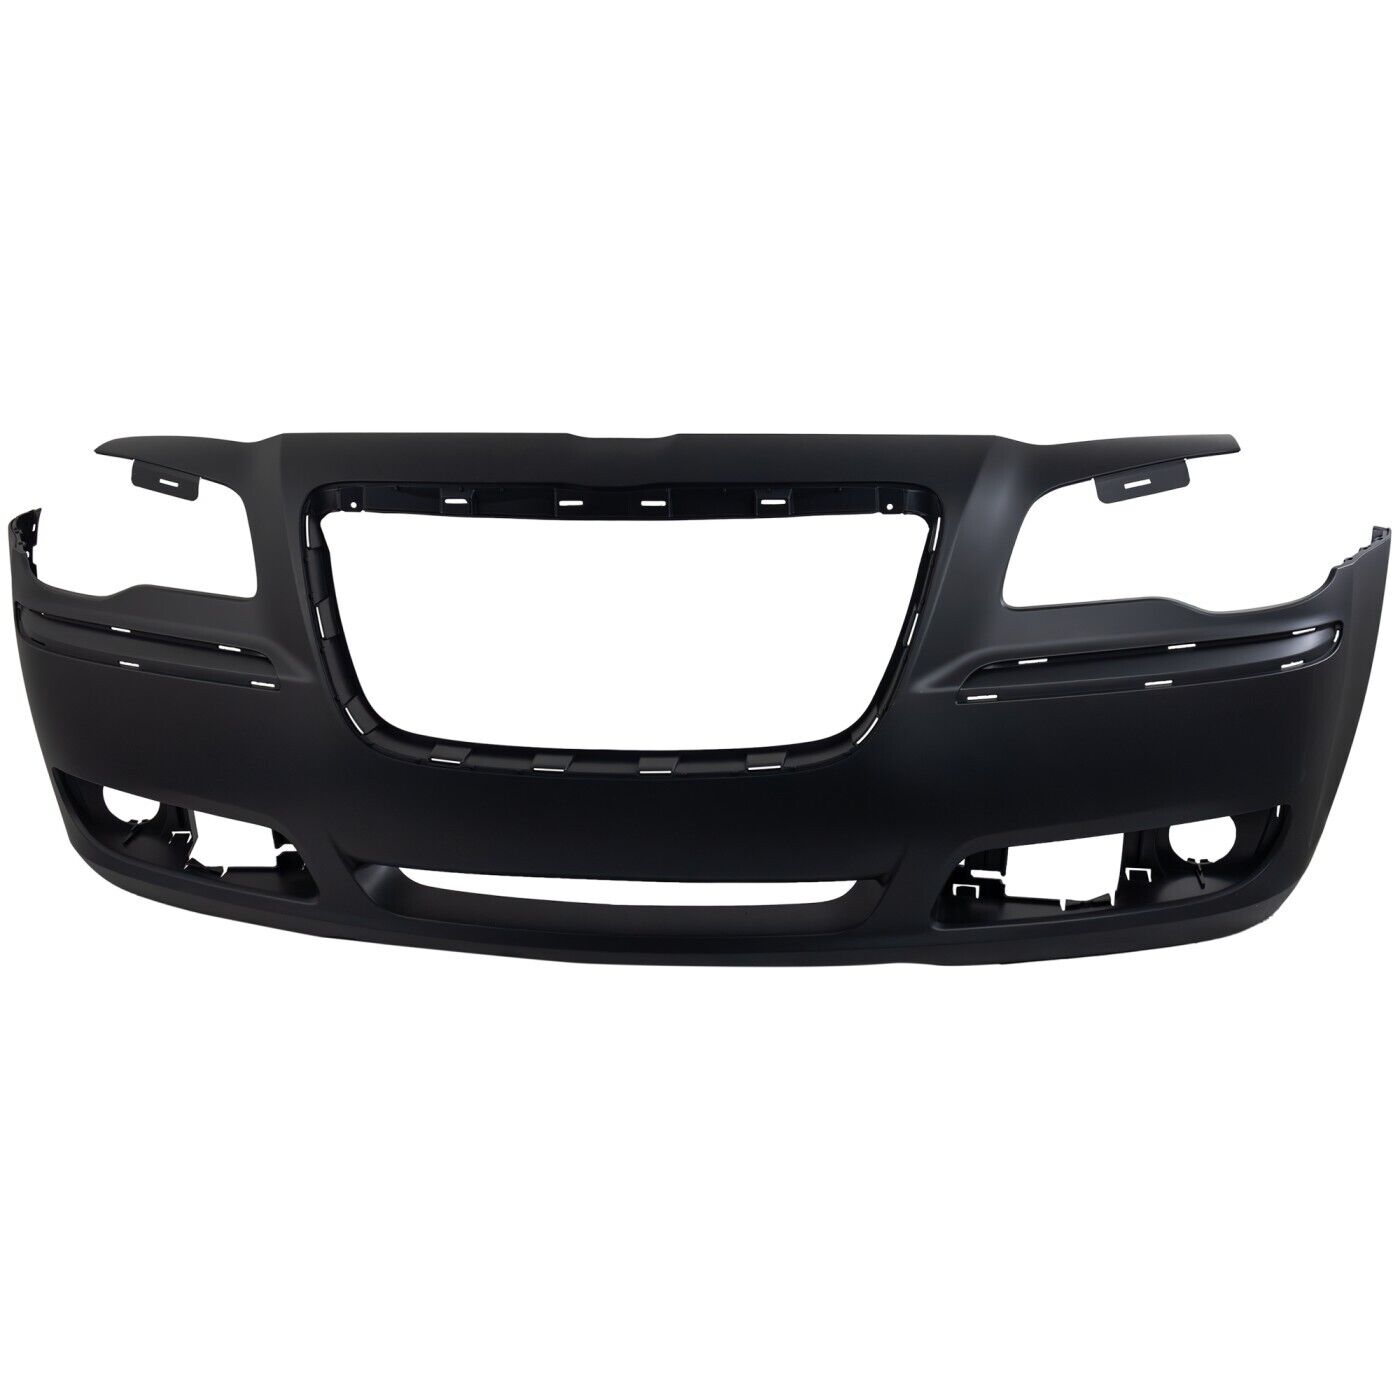 Front Bumper Cover For 2011-2014 Chrysler 300 CAPA With Adaptive Cruise Control